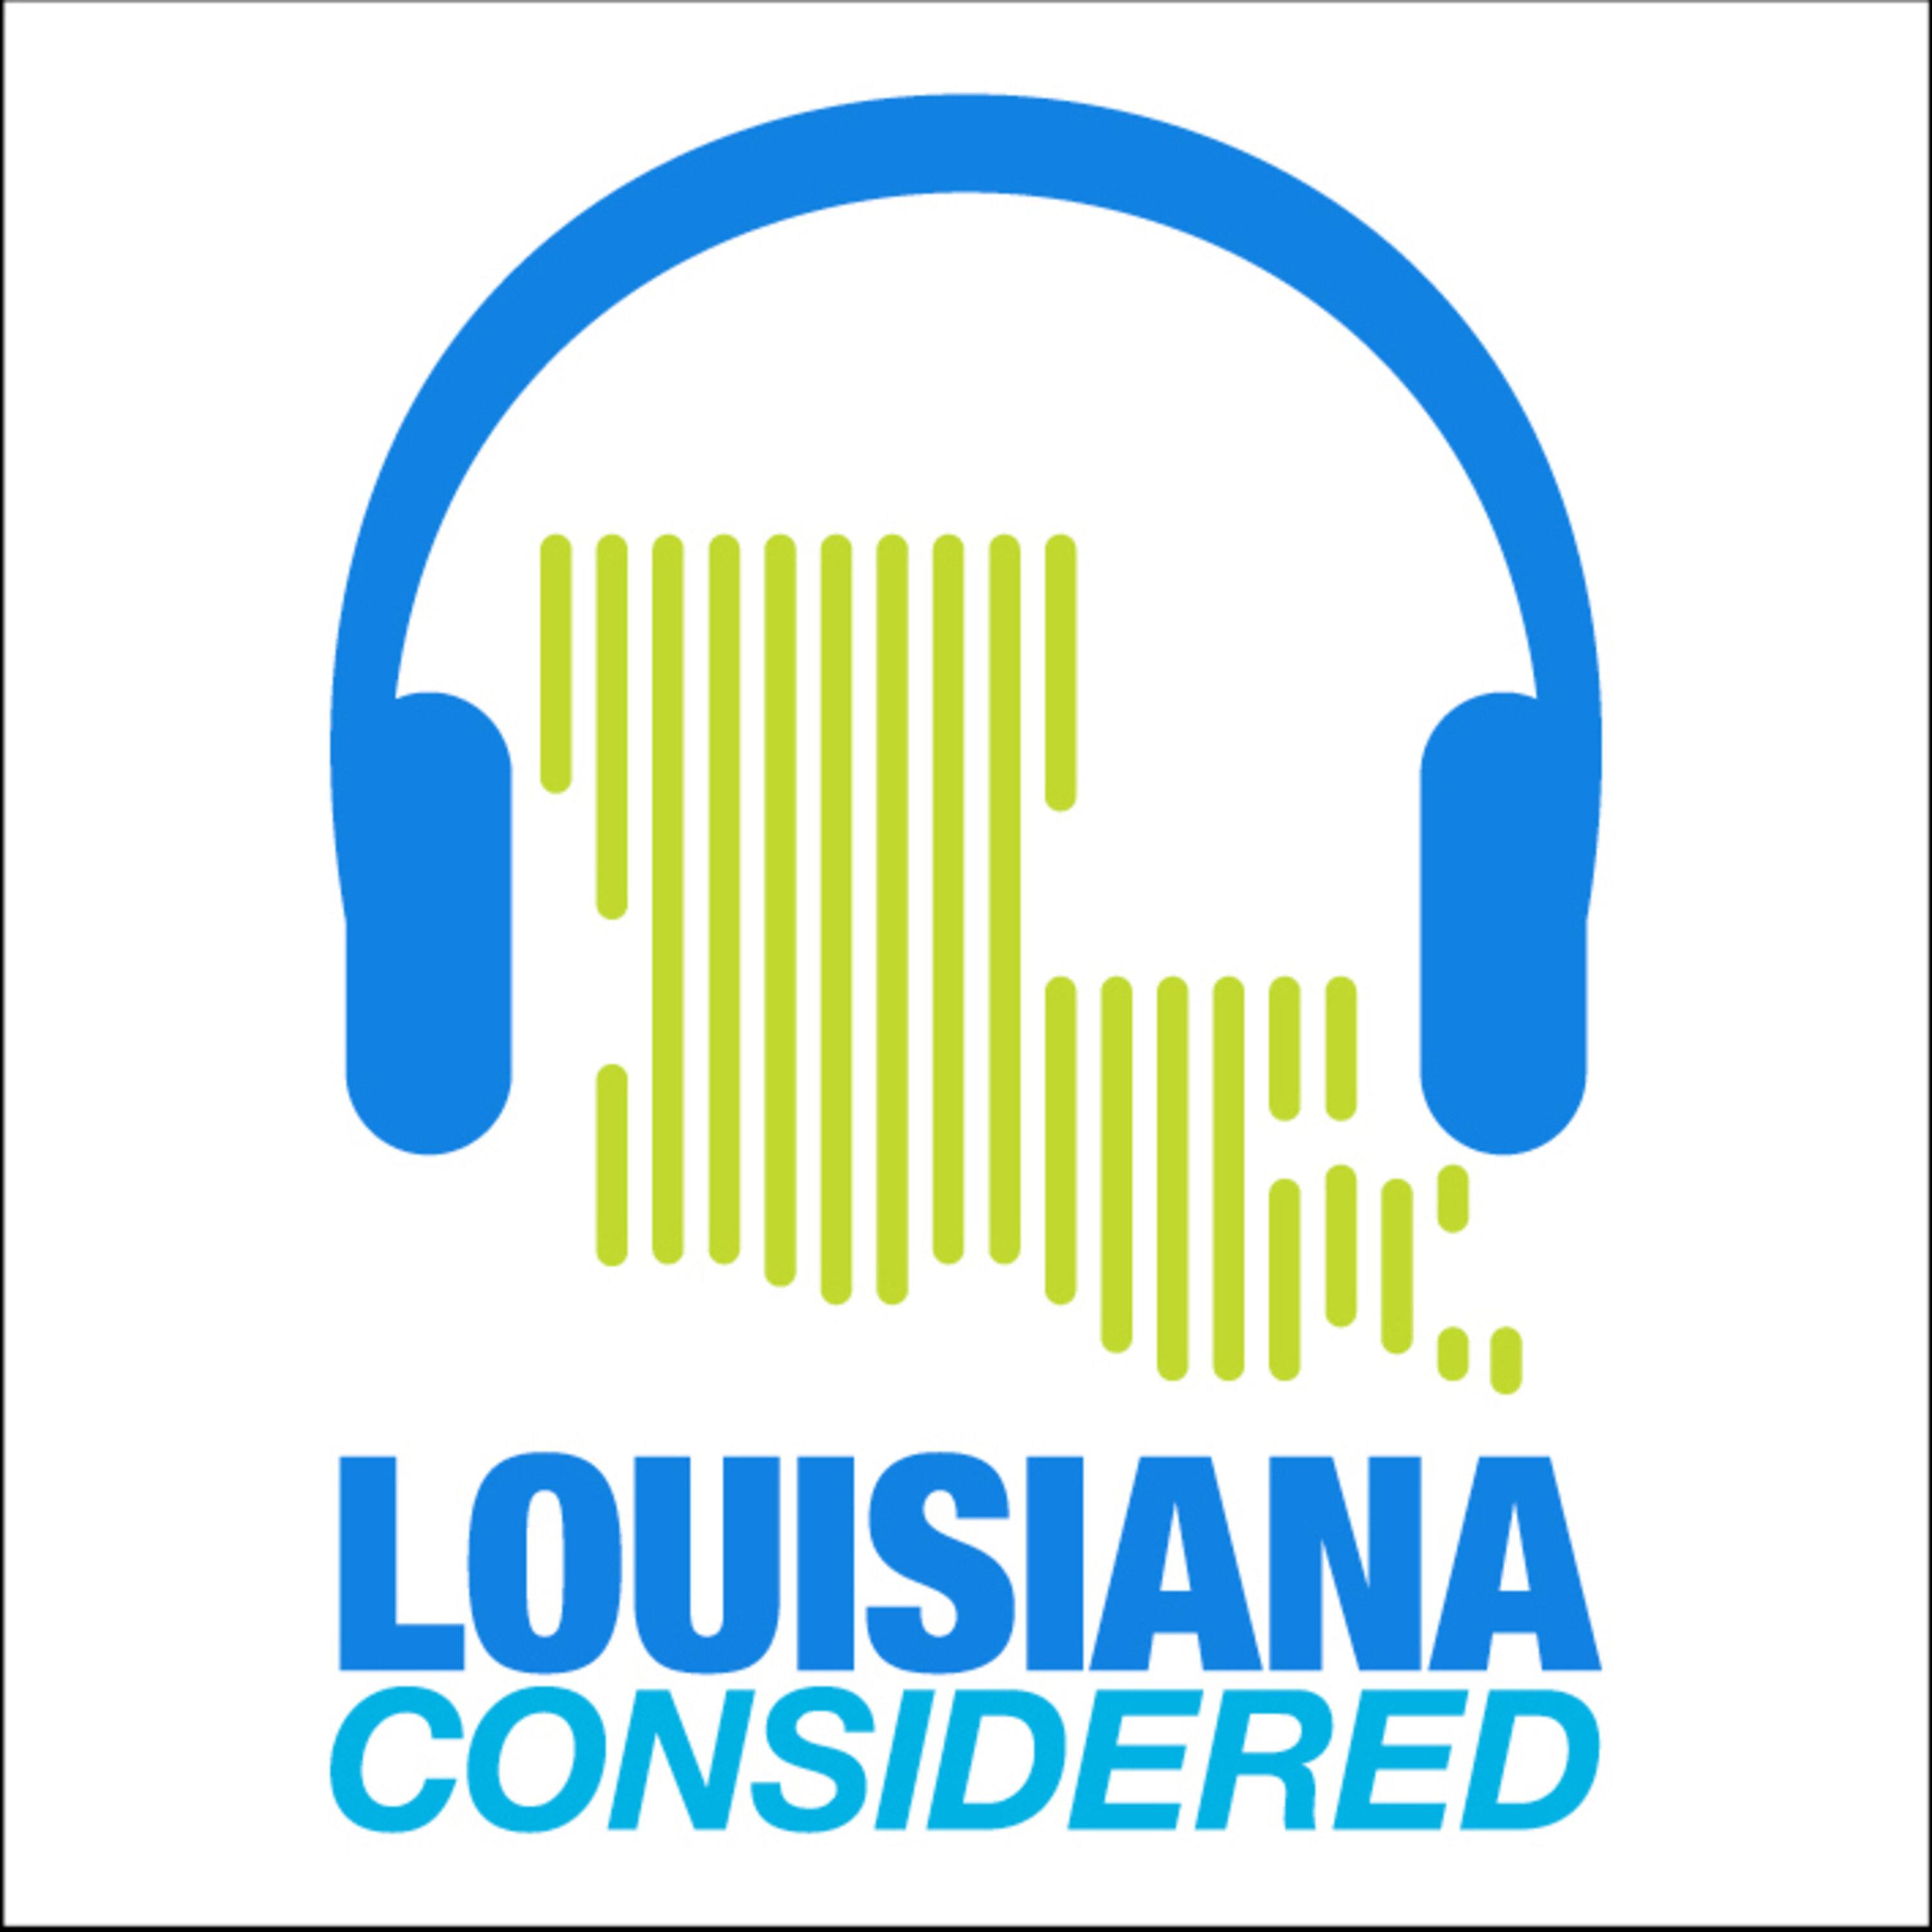 Thumbnail for "Louisiana Considered: Jazz and arts events happening in New Orleans".